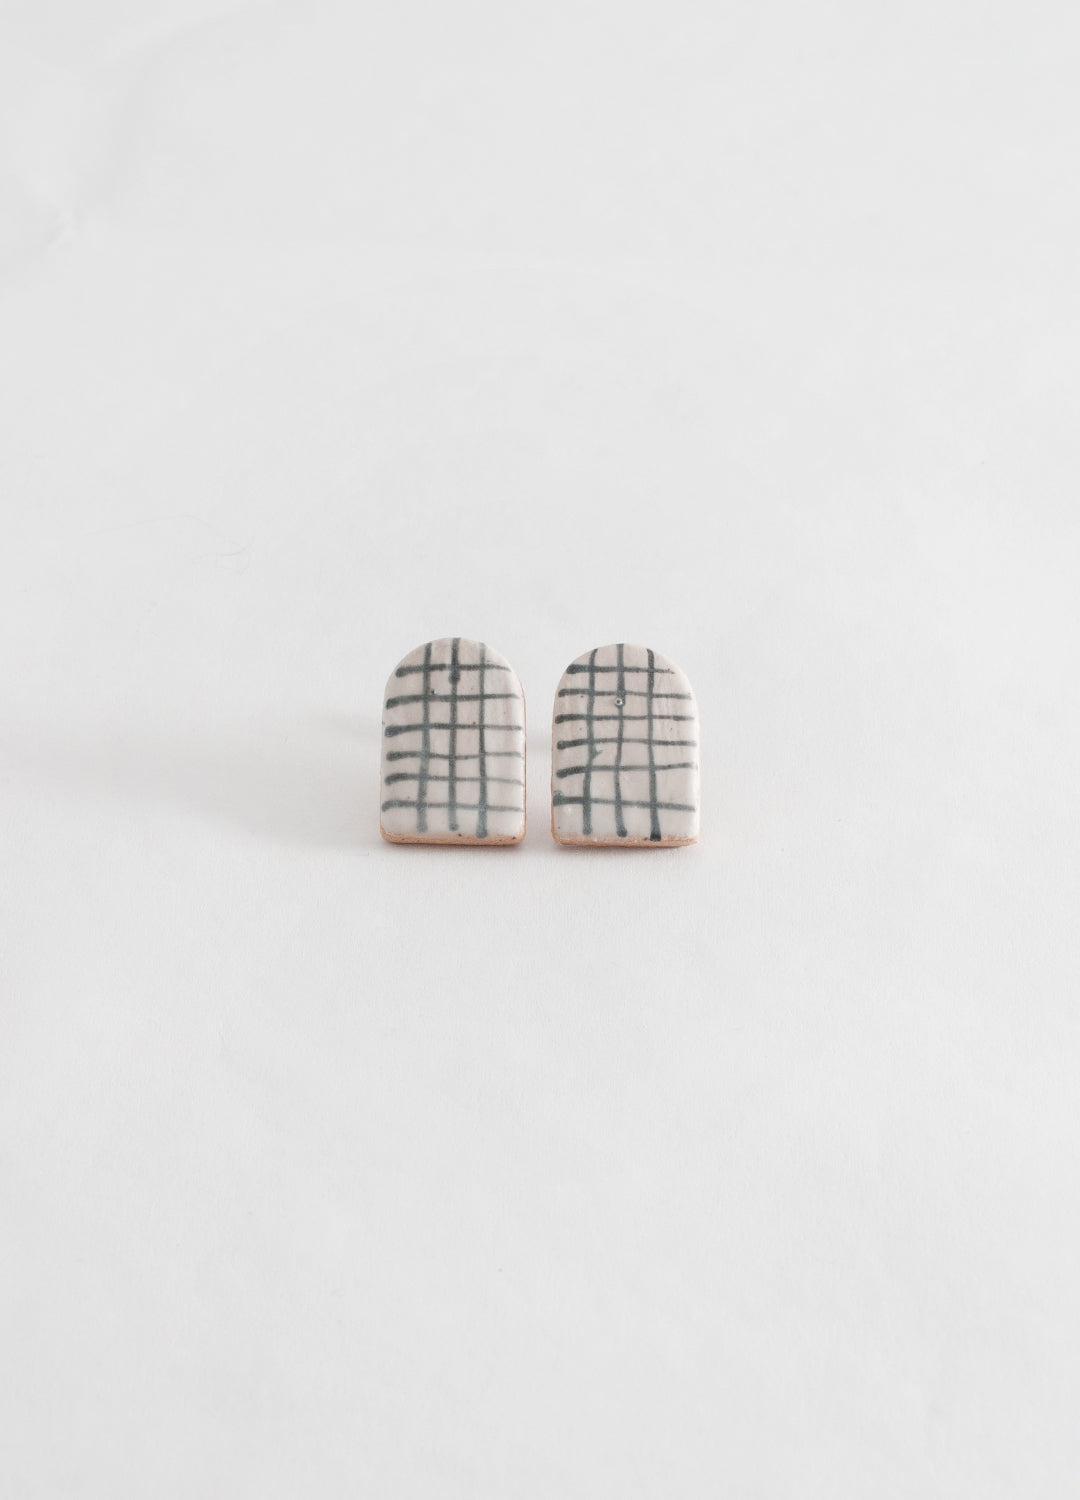 Small Arch Earrings  - Grids